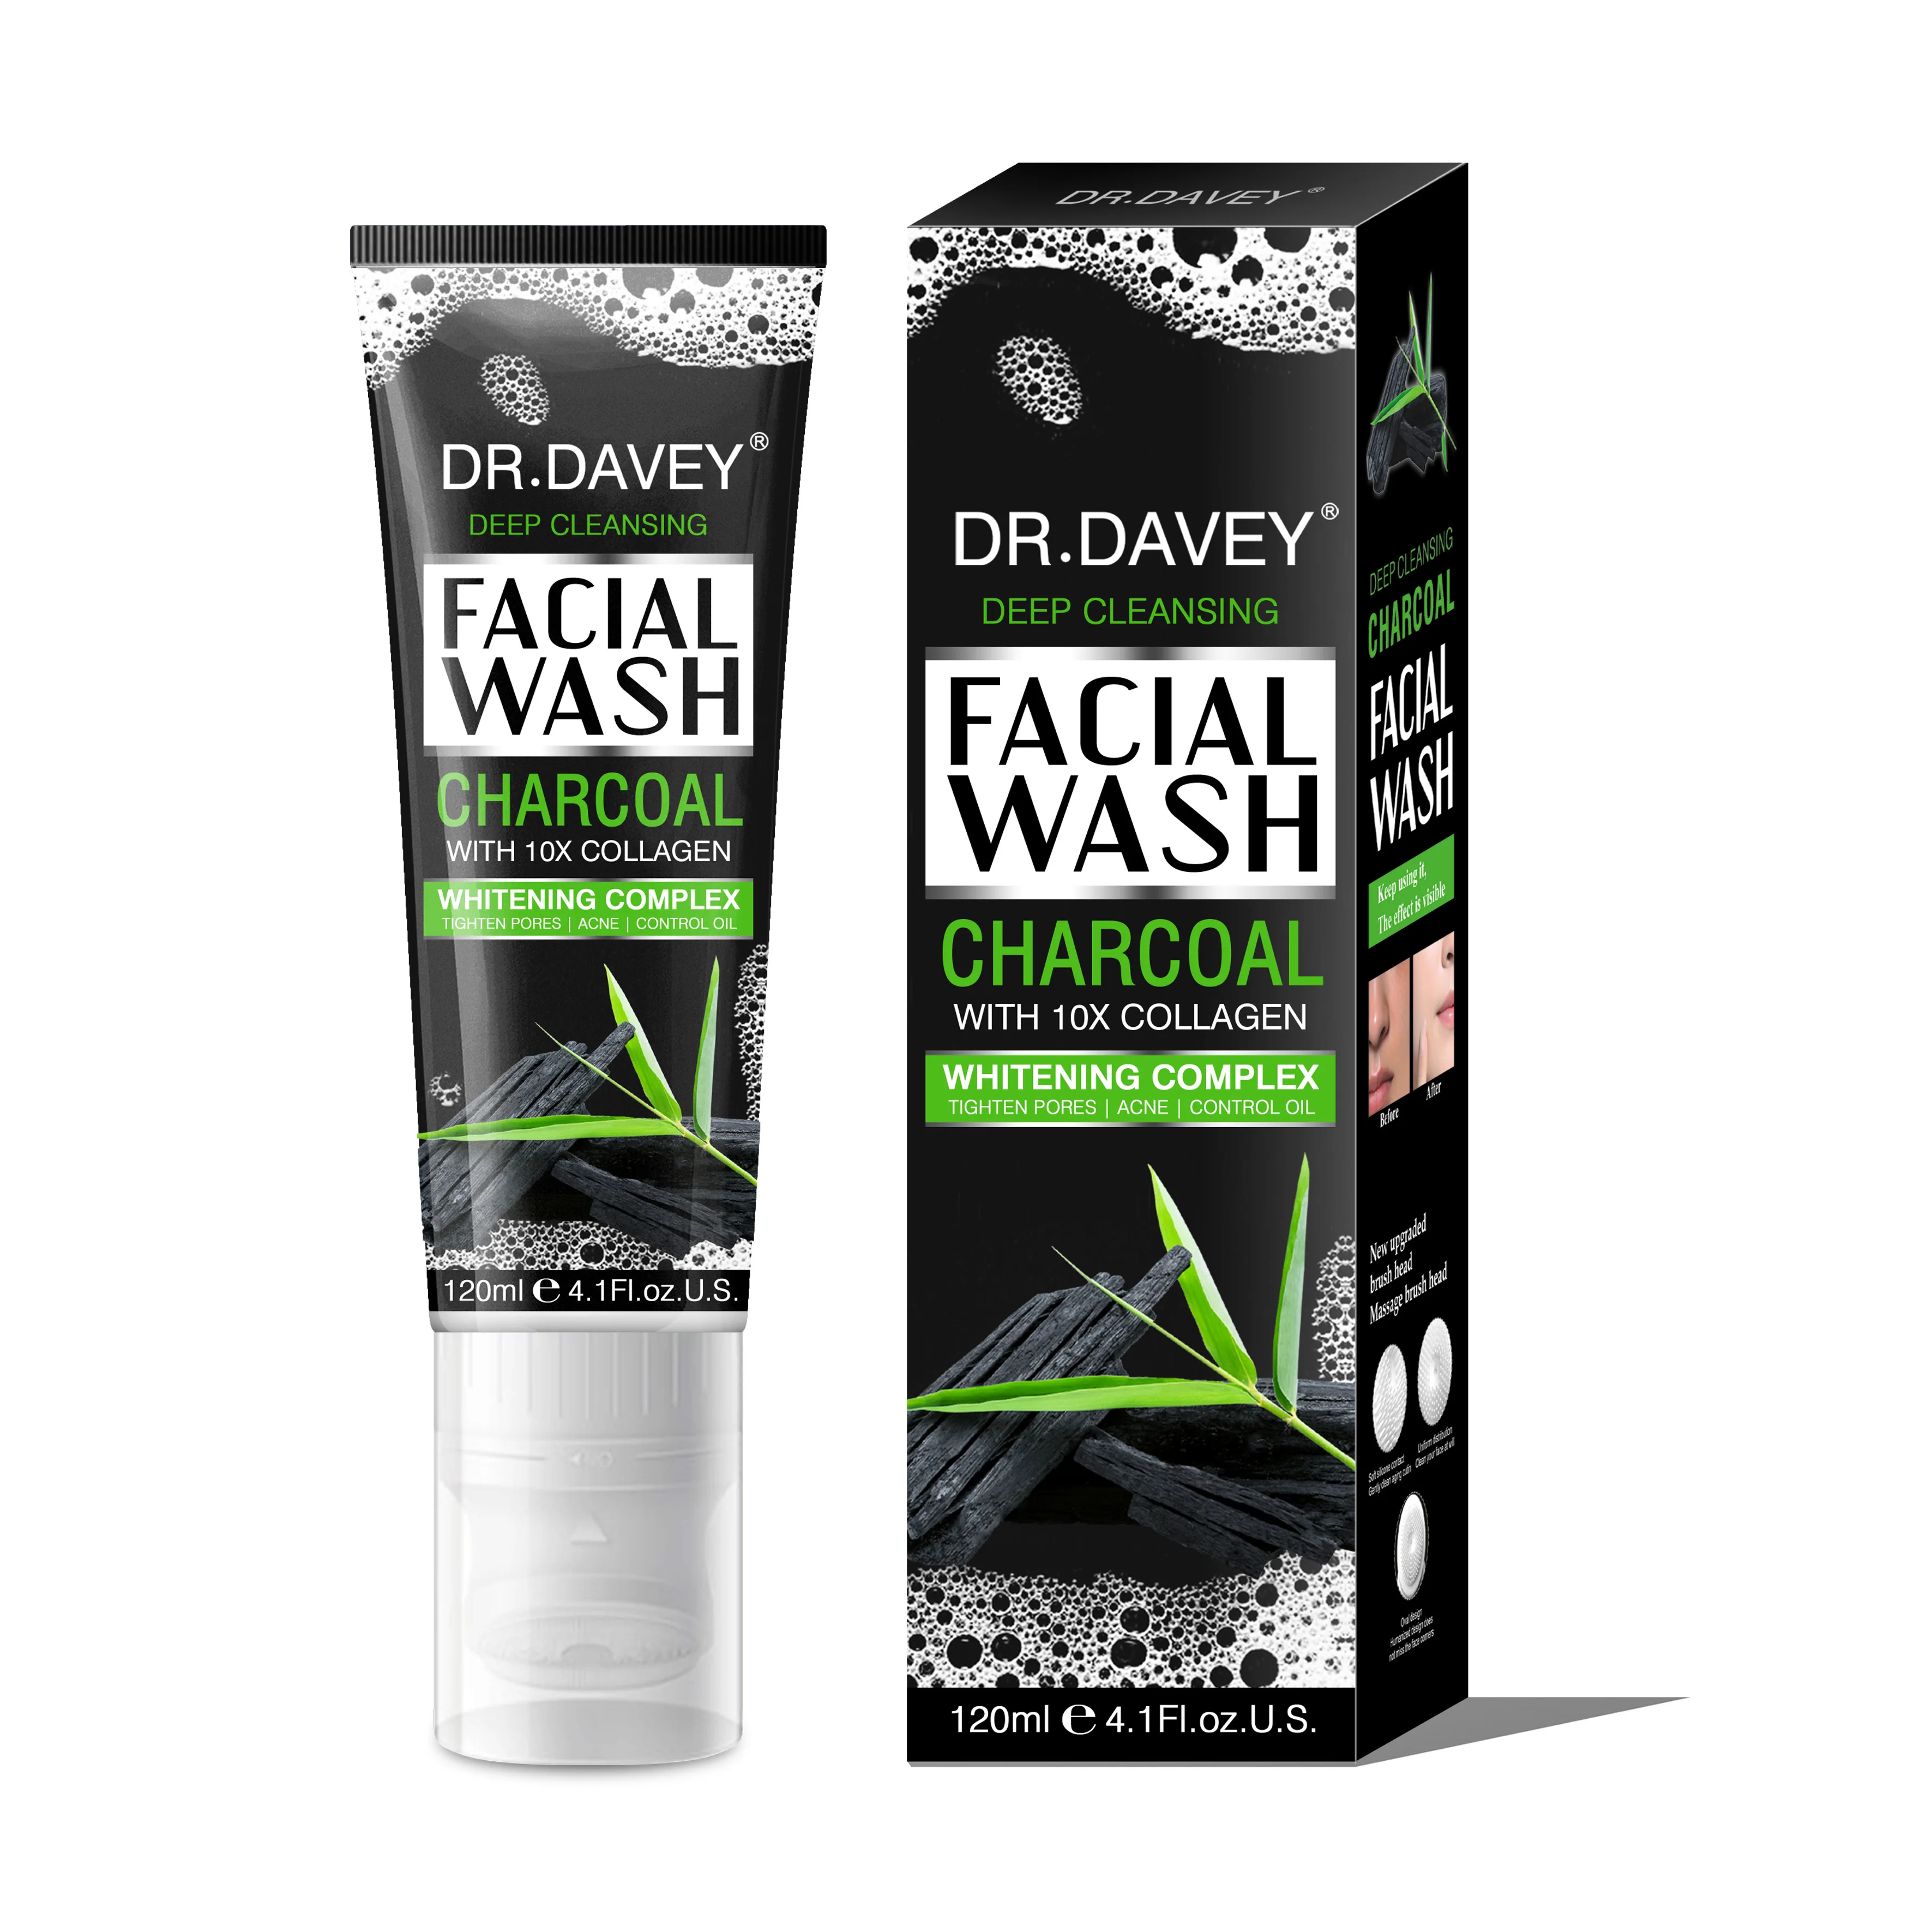 

DR.DAVEY Deep cleansing Refreshing oil control Charcoal Facial Cleanser, White